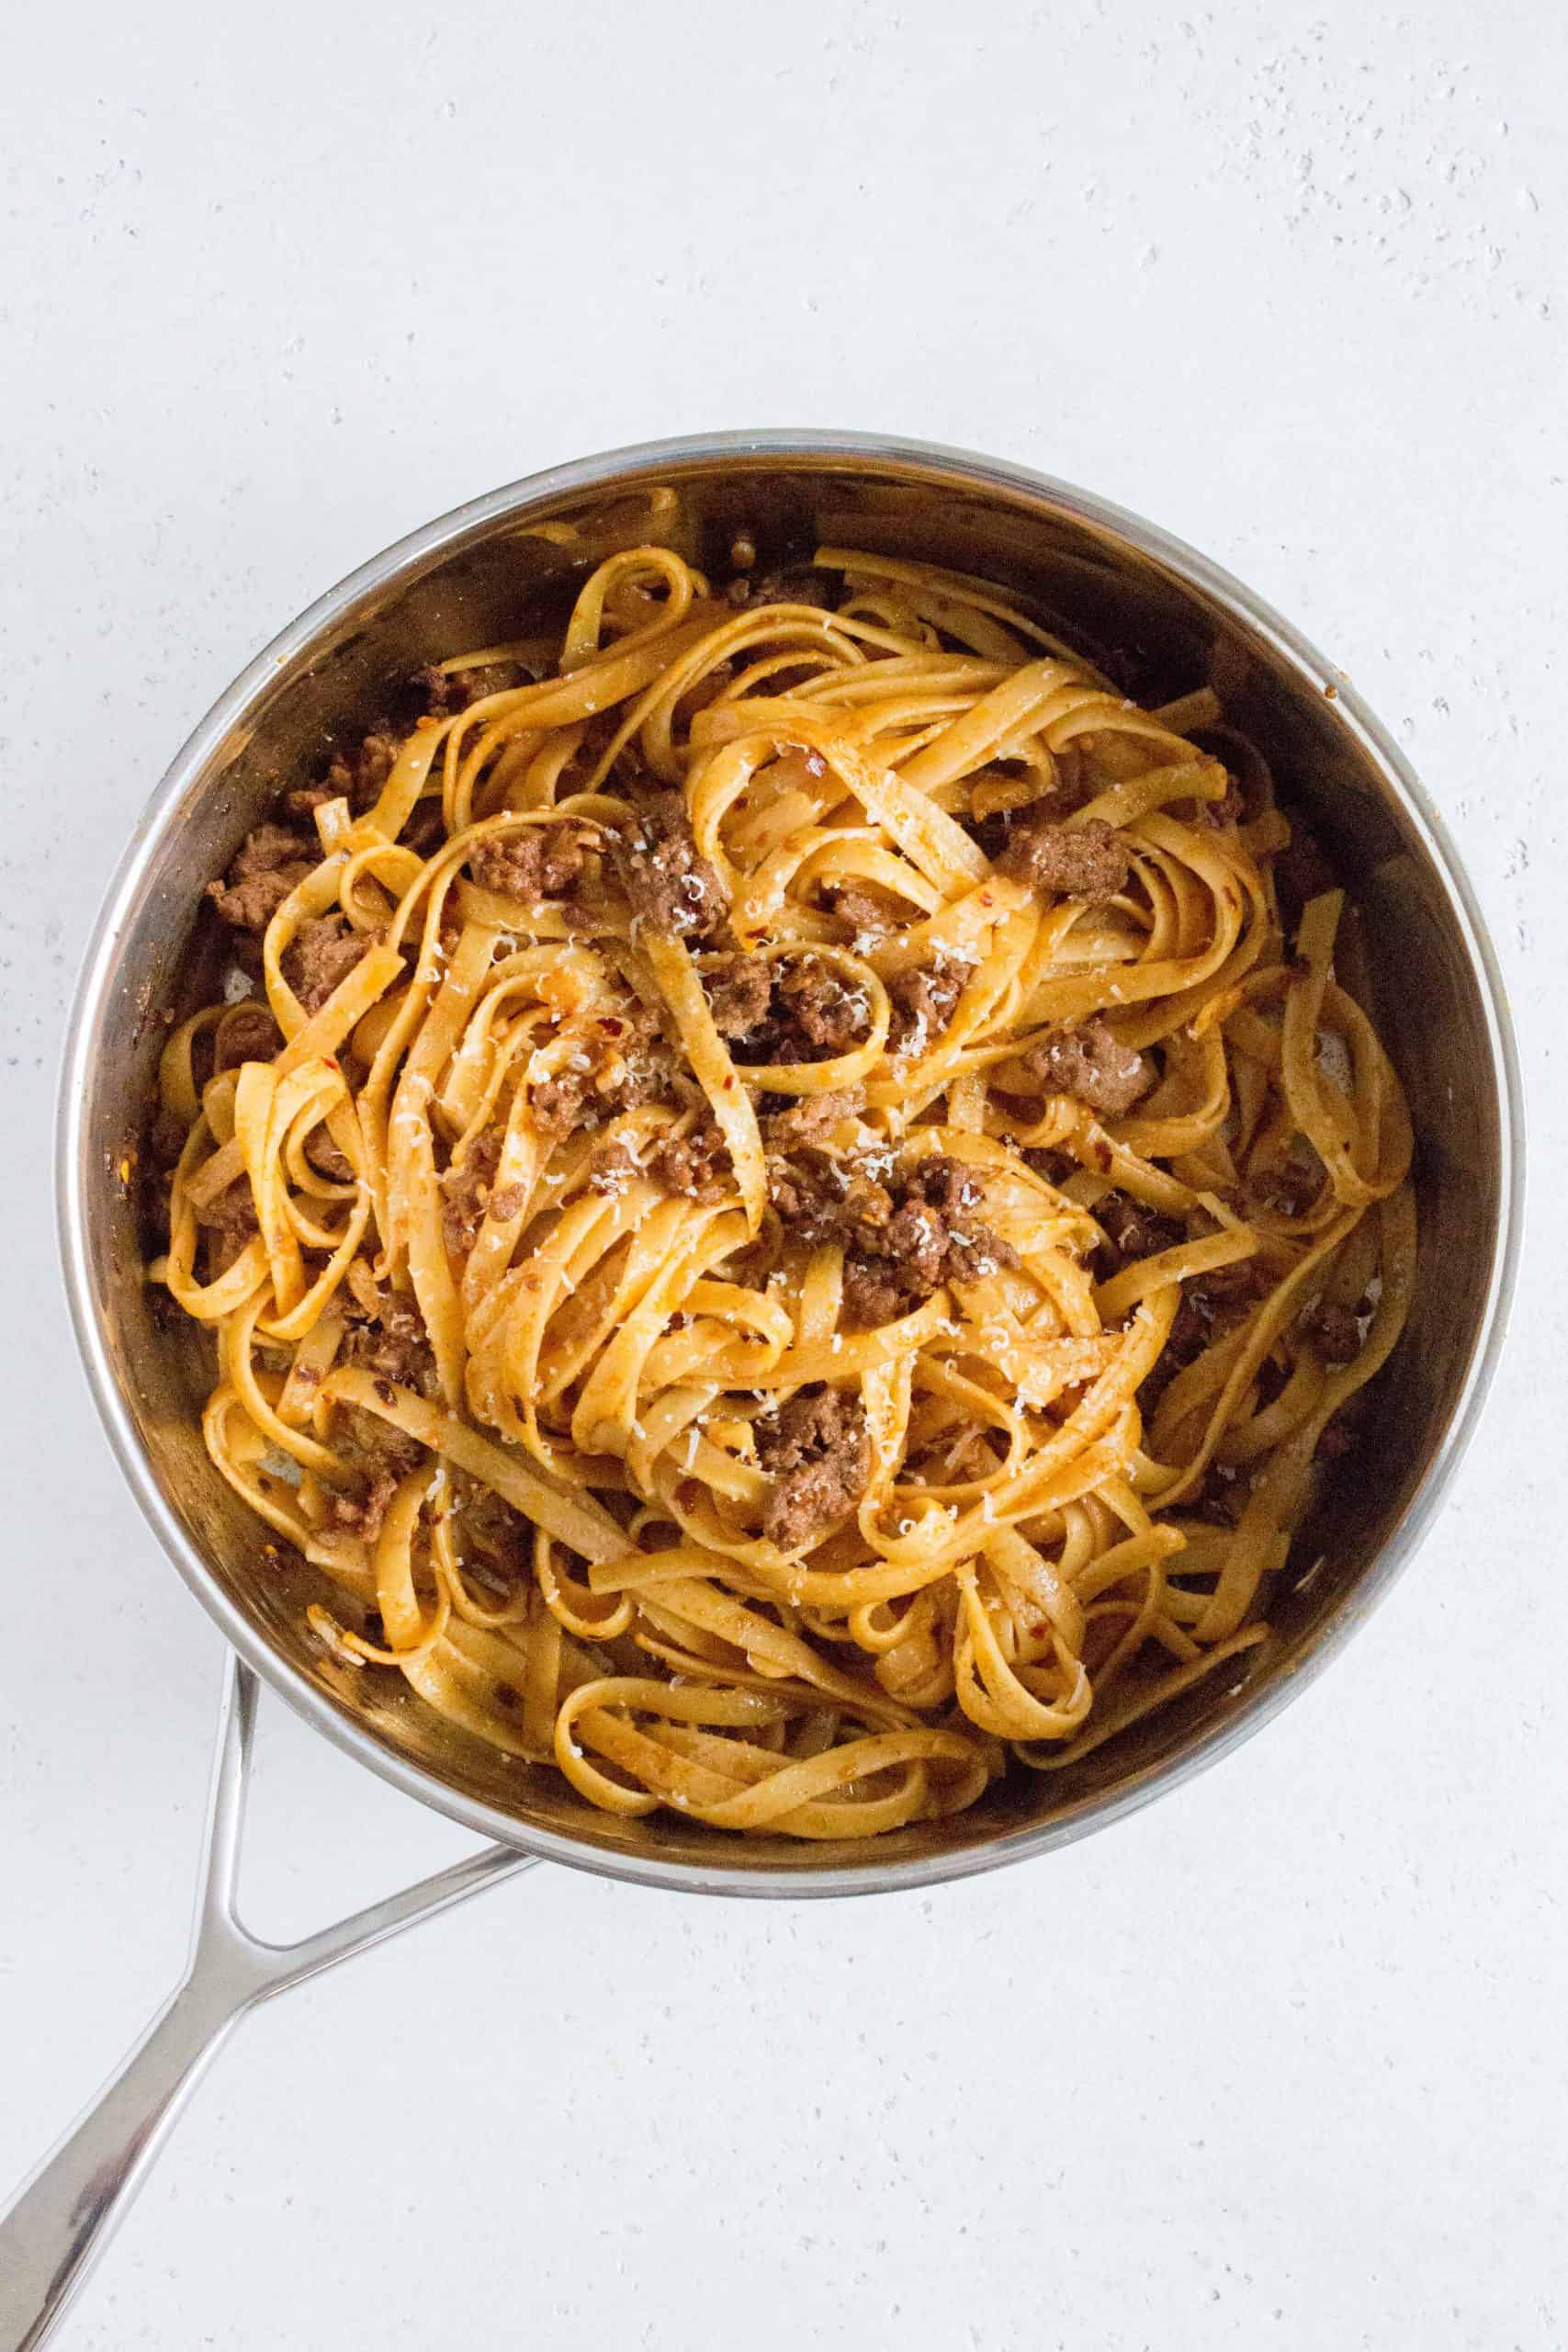 Quick to put together, this Spicy Soy Garlic Butter Noodles with Beef recipe is the perfect flavourful last minute meal. Made with gouchujang and soy sauce, the noodles are perfectly coated and will have you asking for seconds!